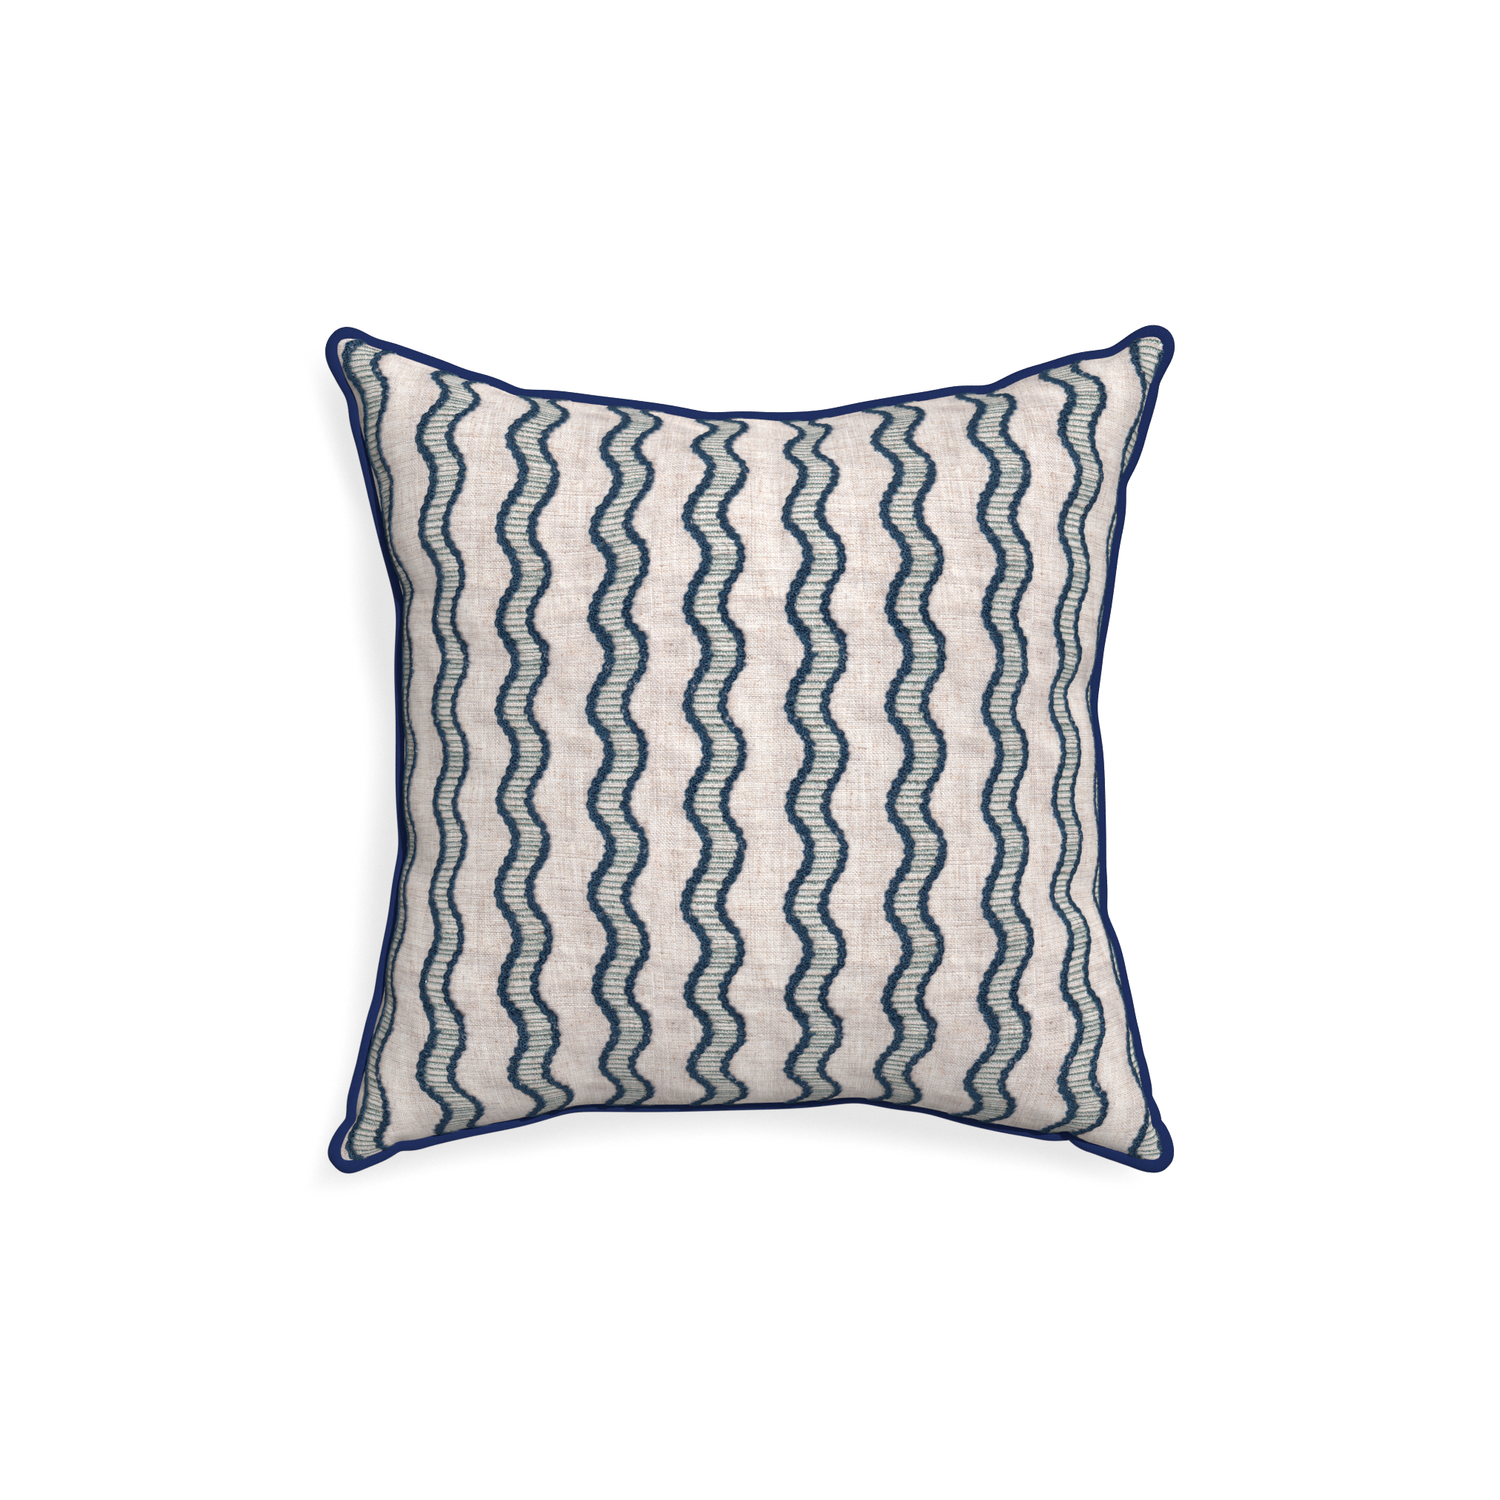 18-square beatrice custom embroidered wavepillow with midnight piping on white background